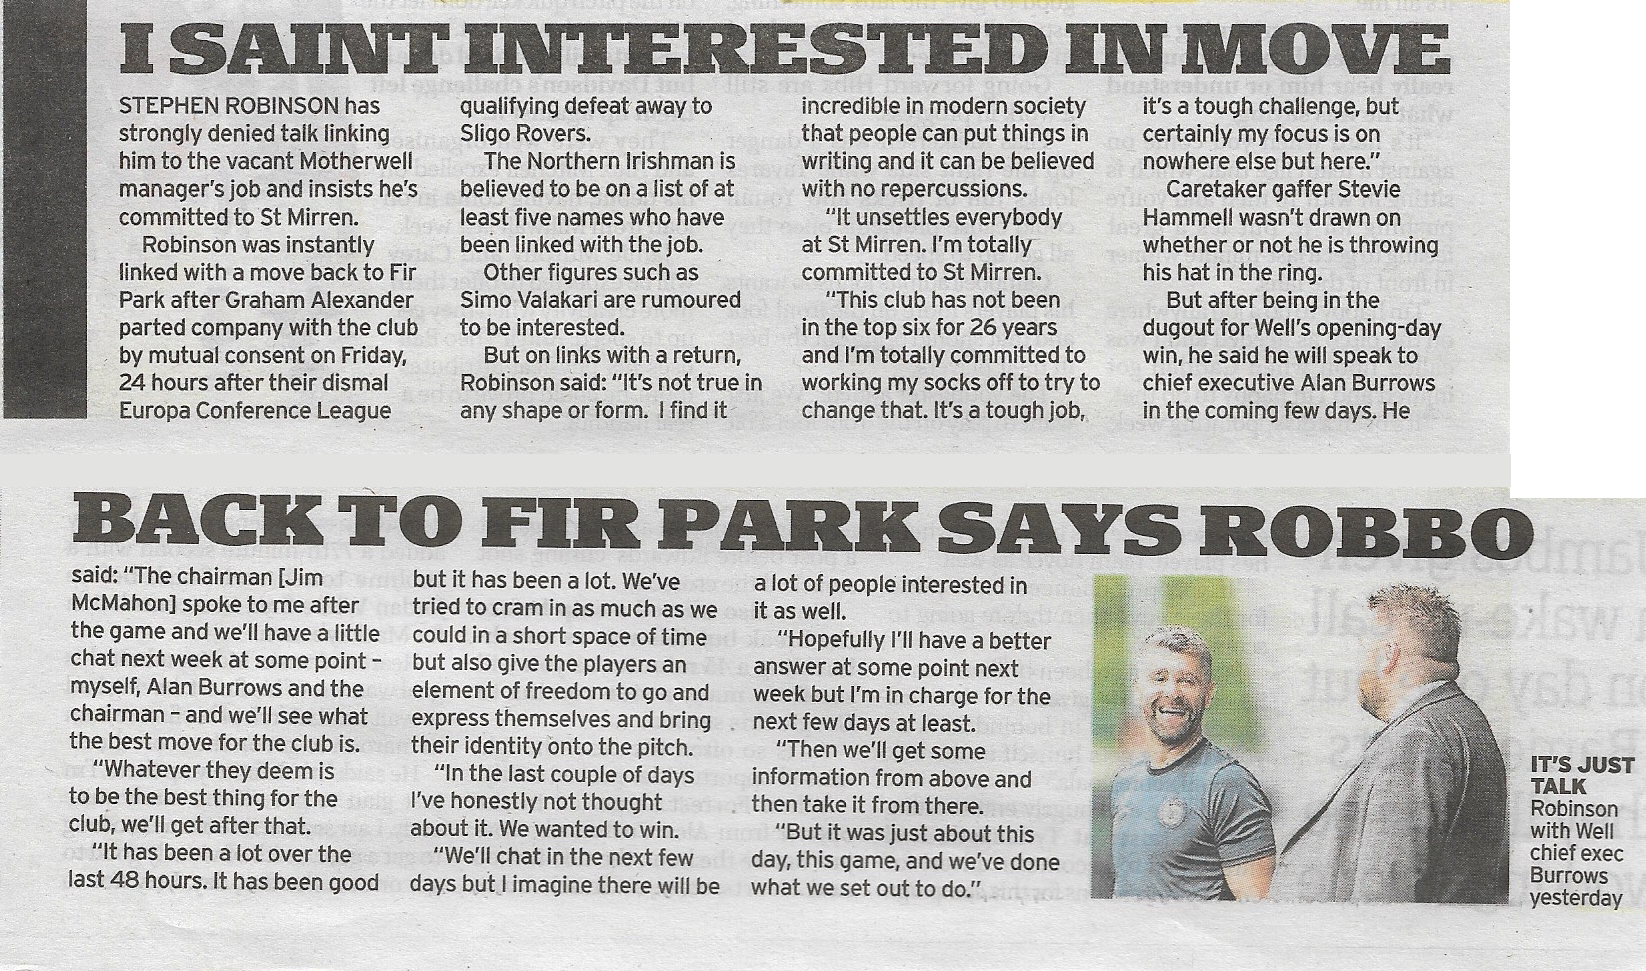 Newspaper Article about Stephen Robinson being linked to Motherwell vacancy